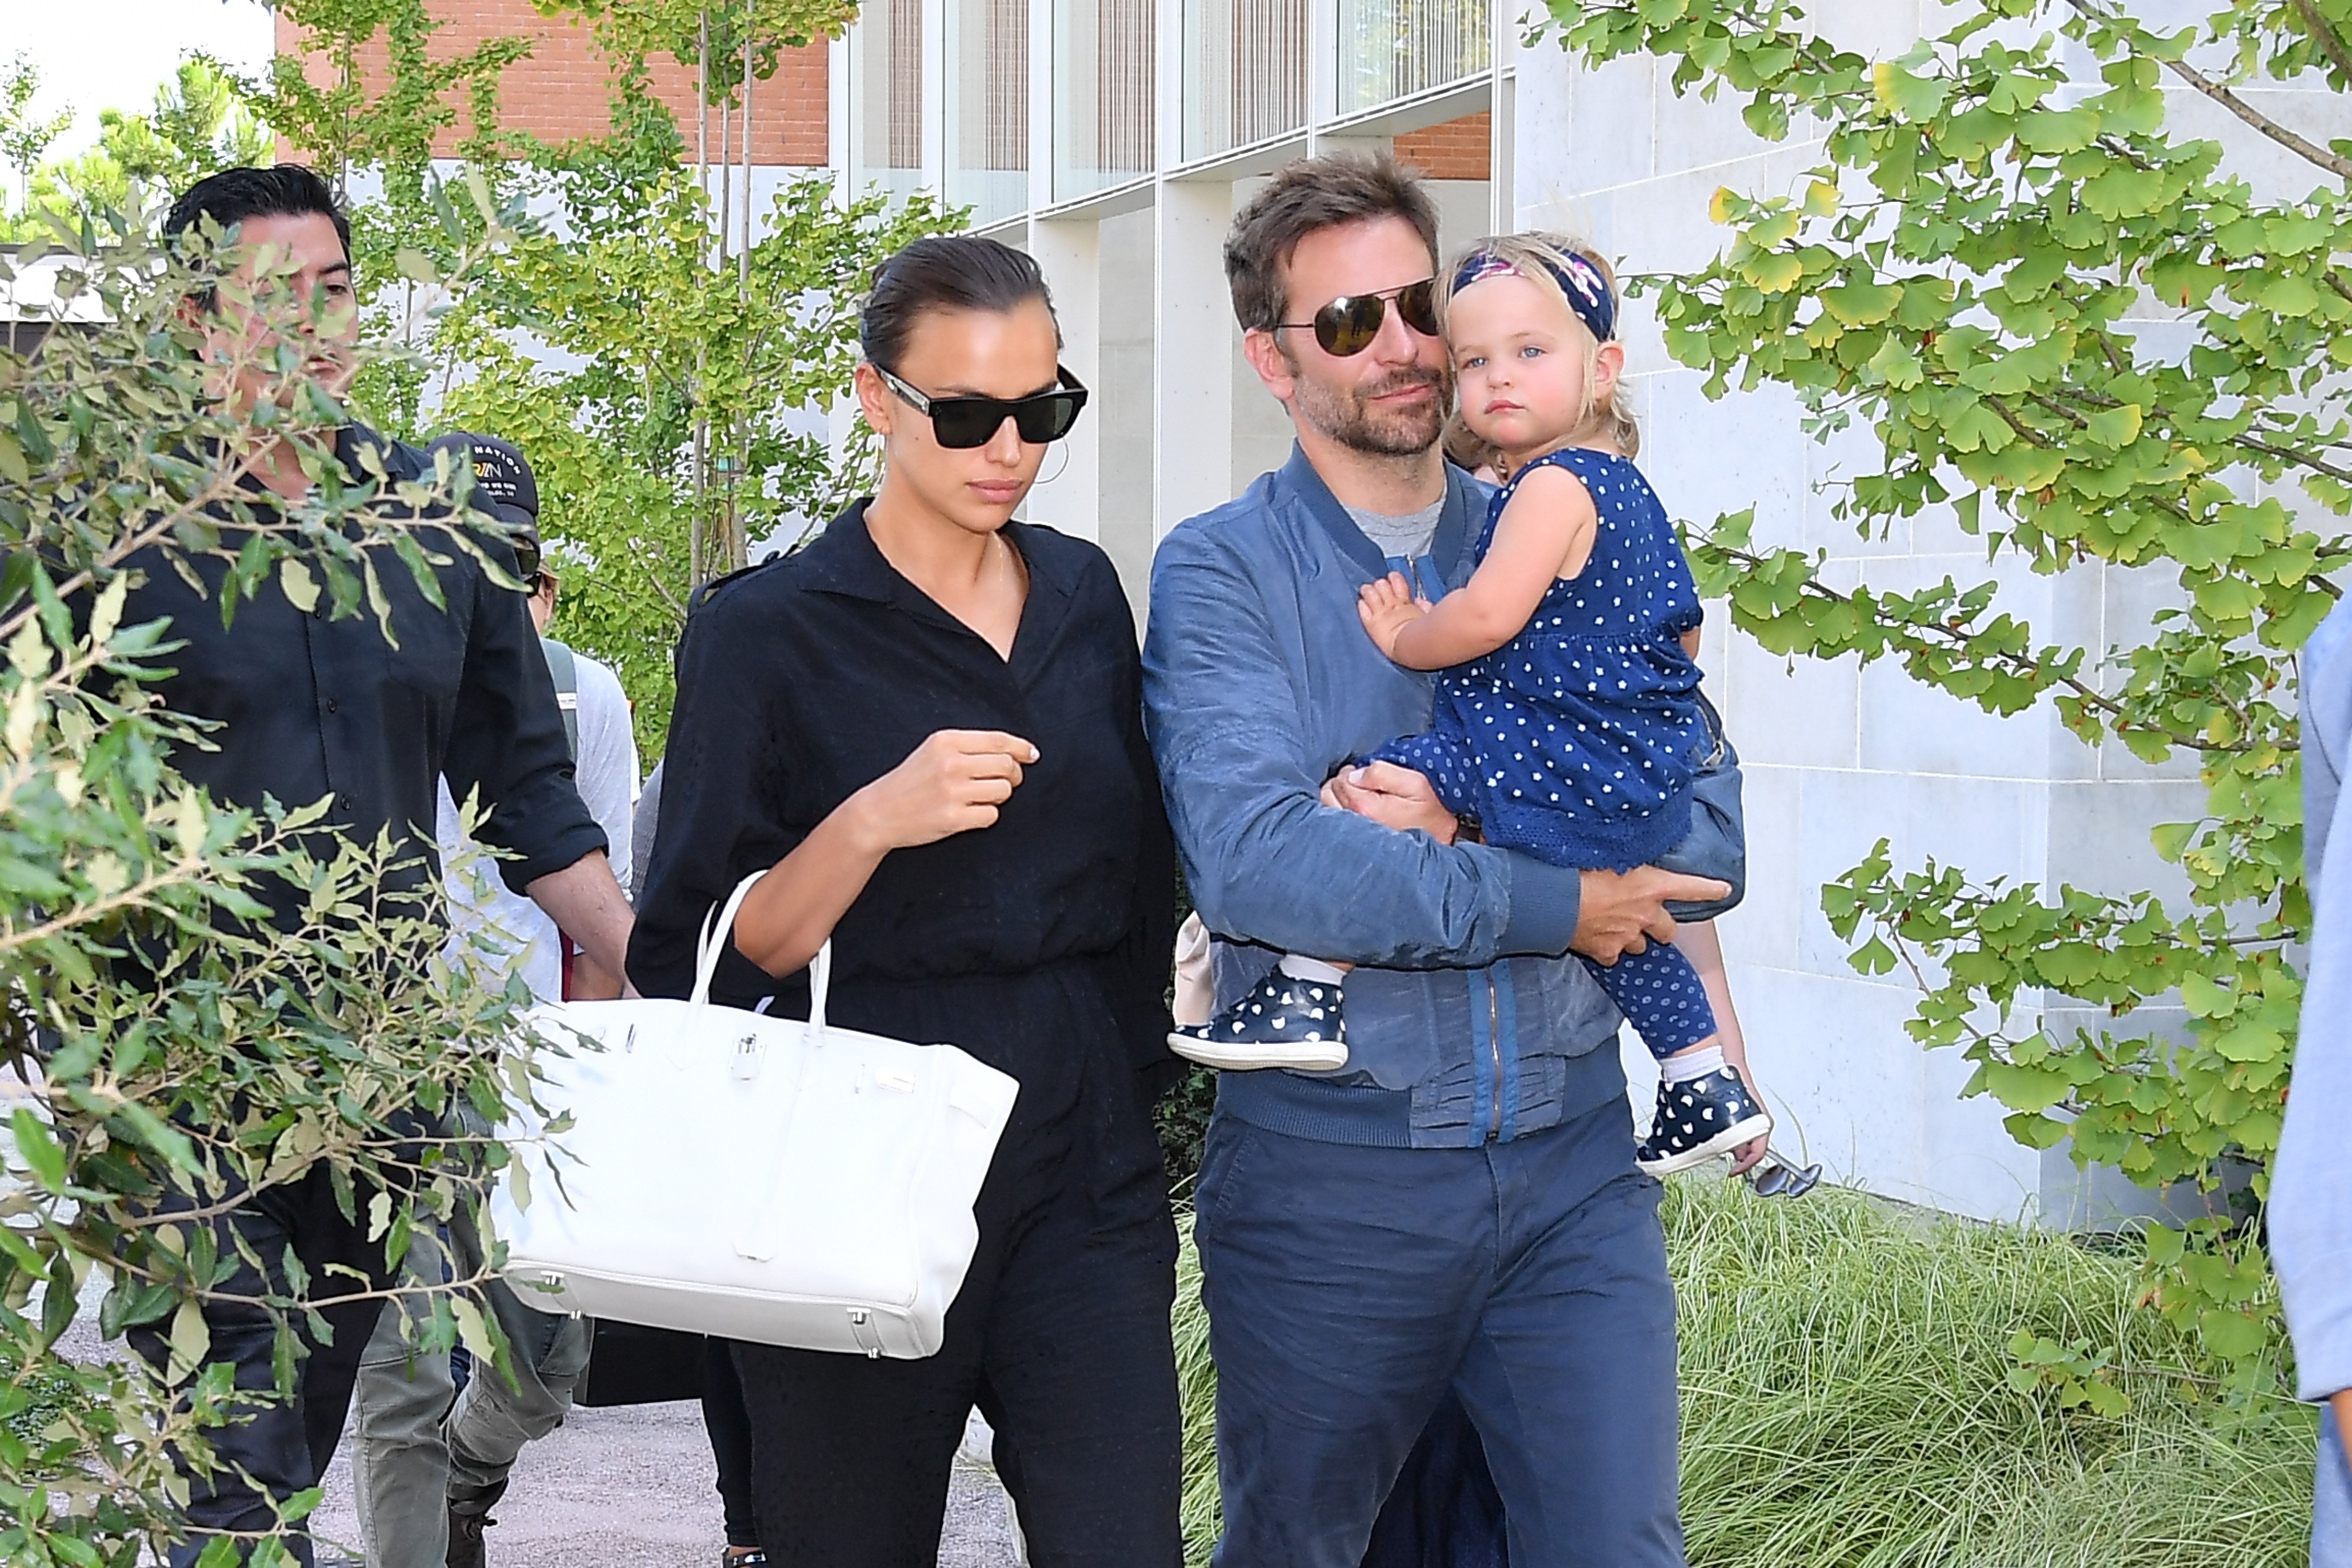 Bradley Cooper, Irina Shayk, and their daughter Lea at the 75th Venice Film Festival on August 30, 2018 | Source: Getty Images